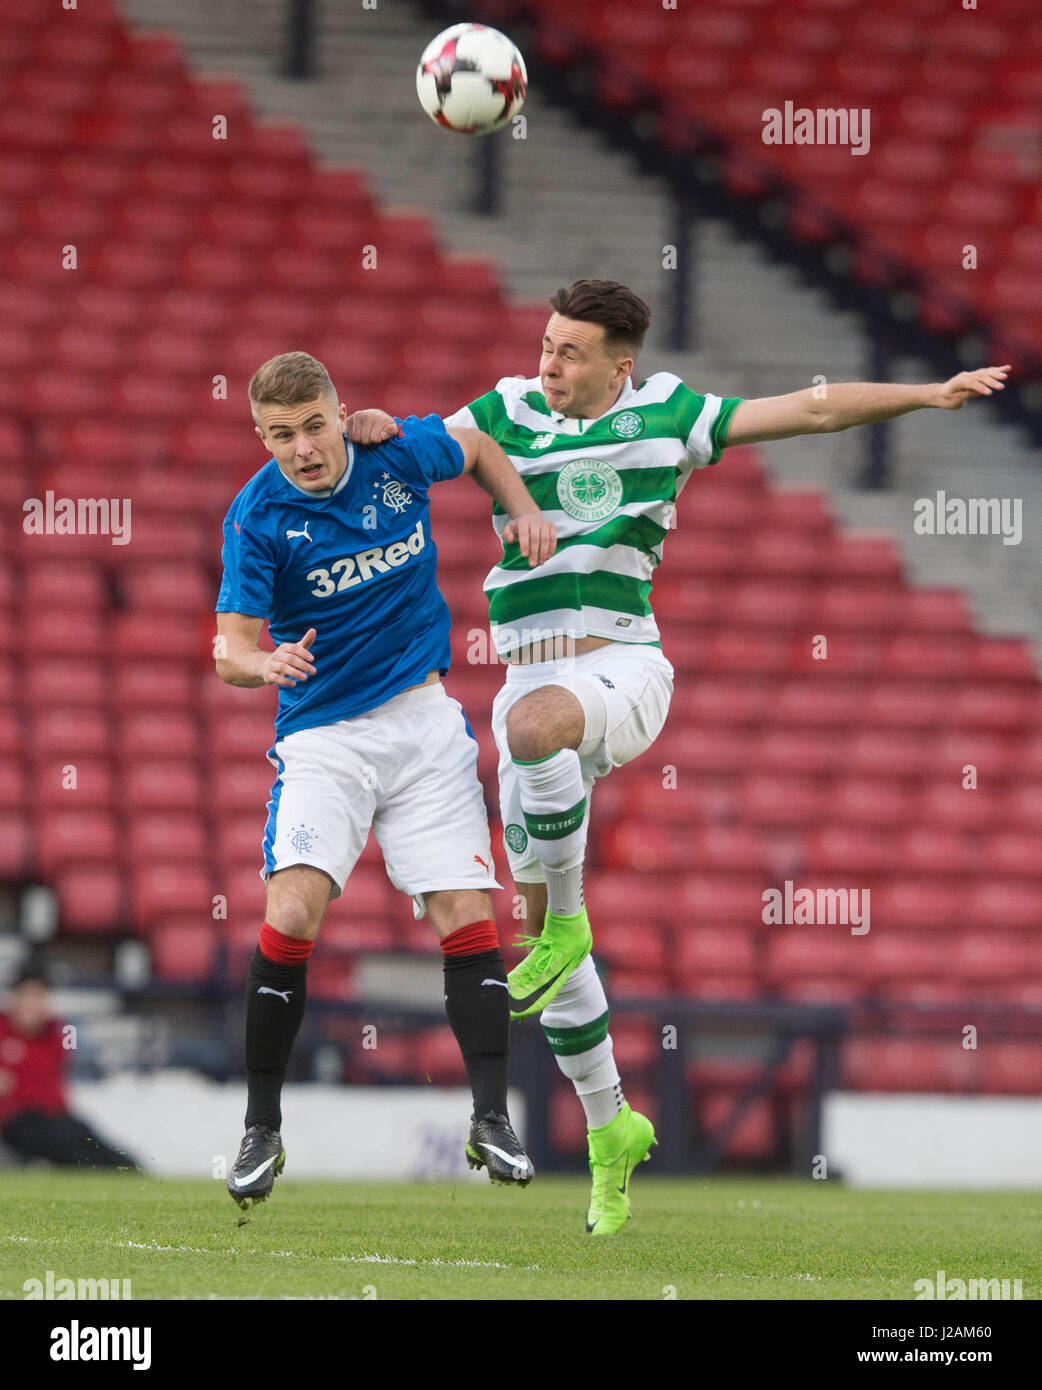 Rangers' Andrew Dallas (left) and Celtic's Josh Kerr battle for the ball during the Scottish FA Youth Cup Final at Hampden Park, Glasgow. Stock Photo